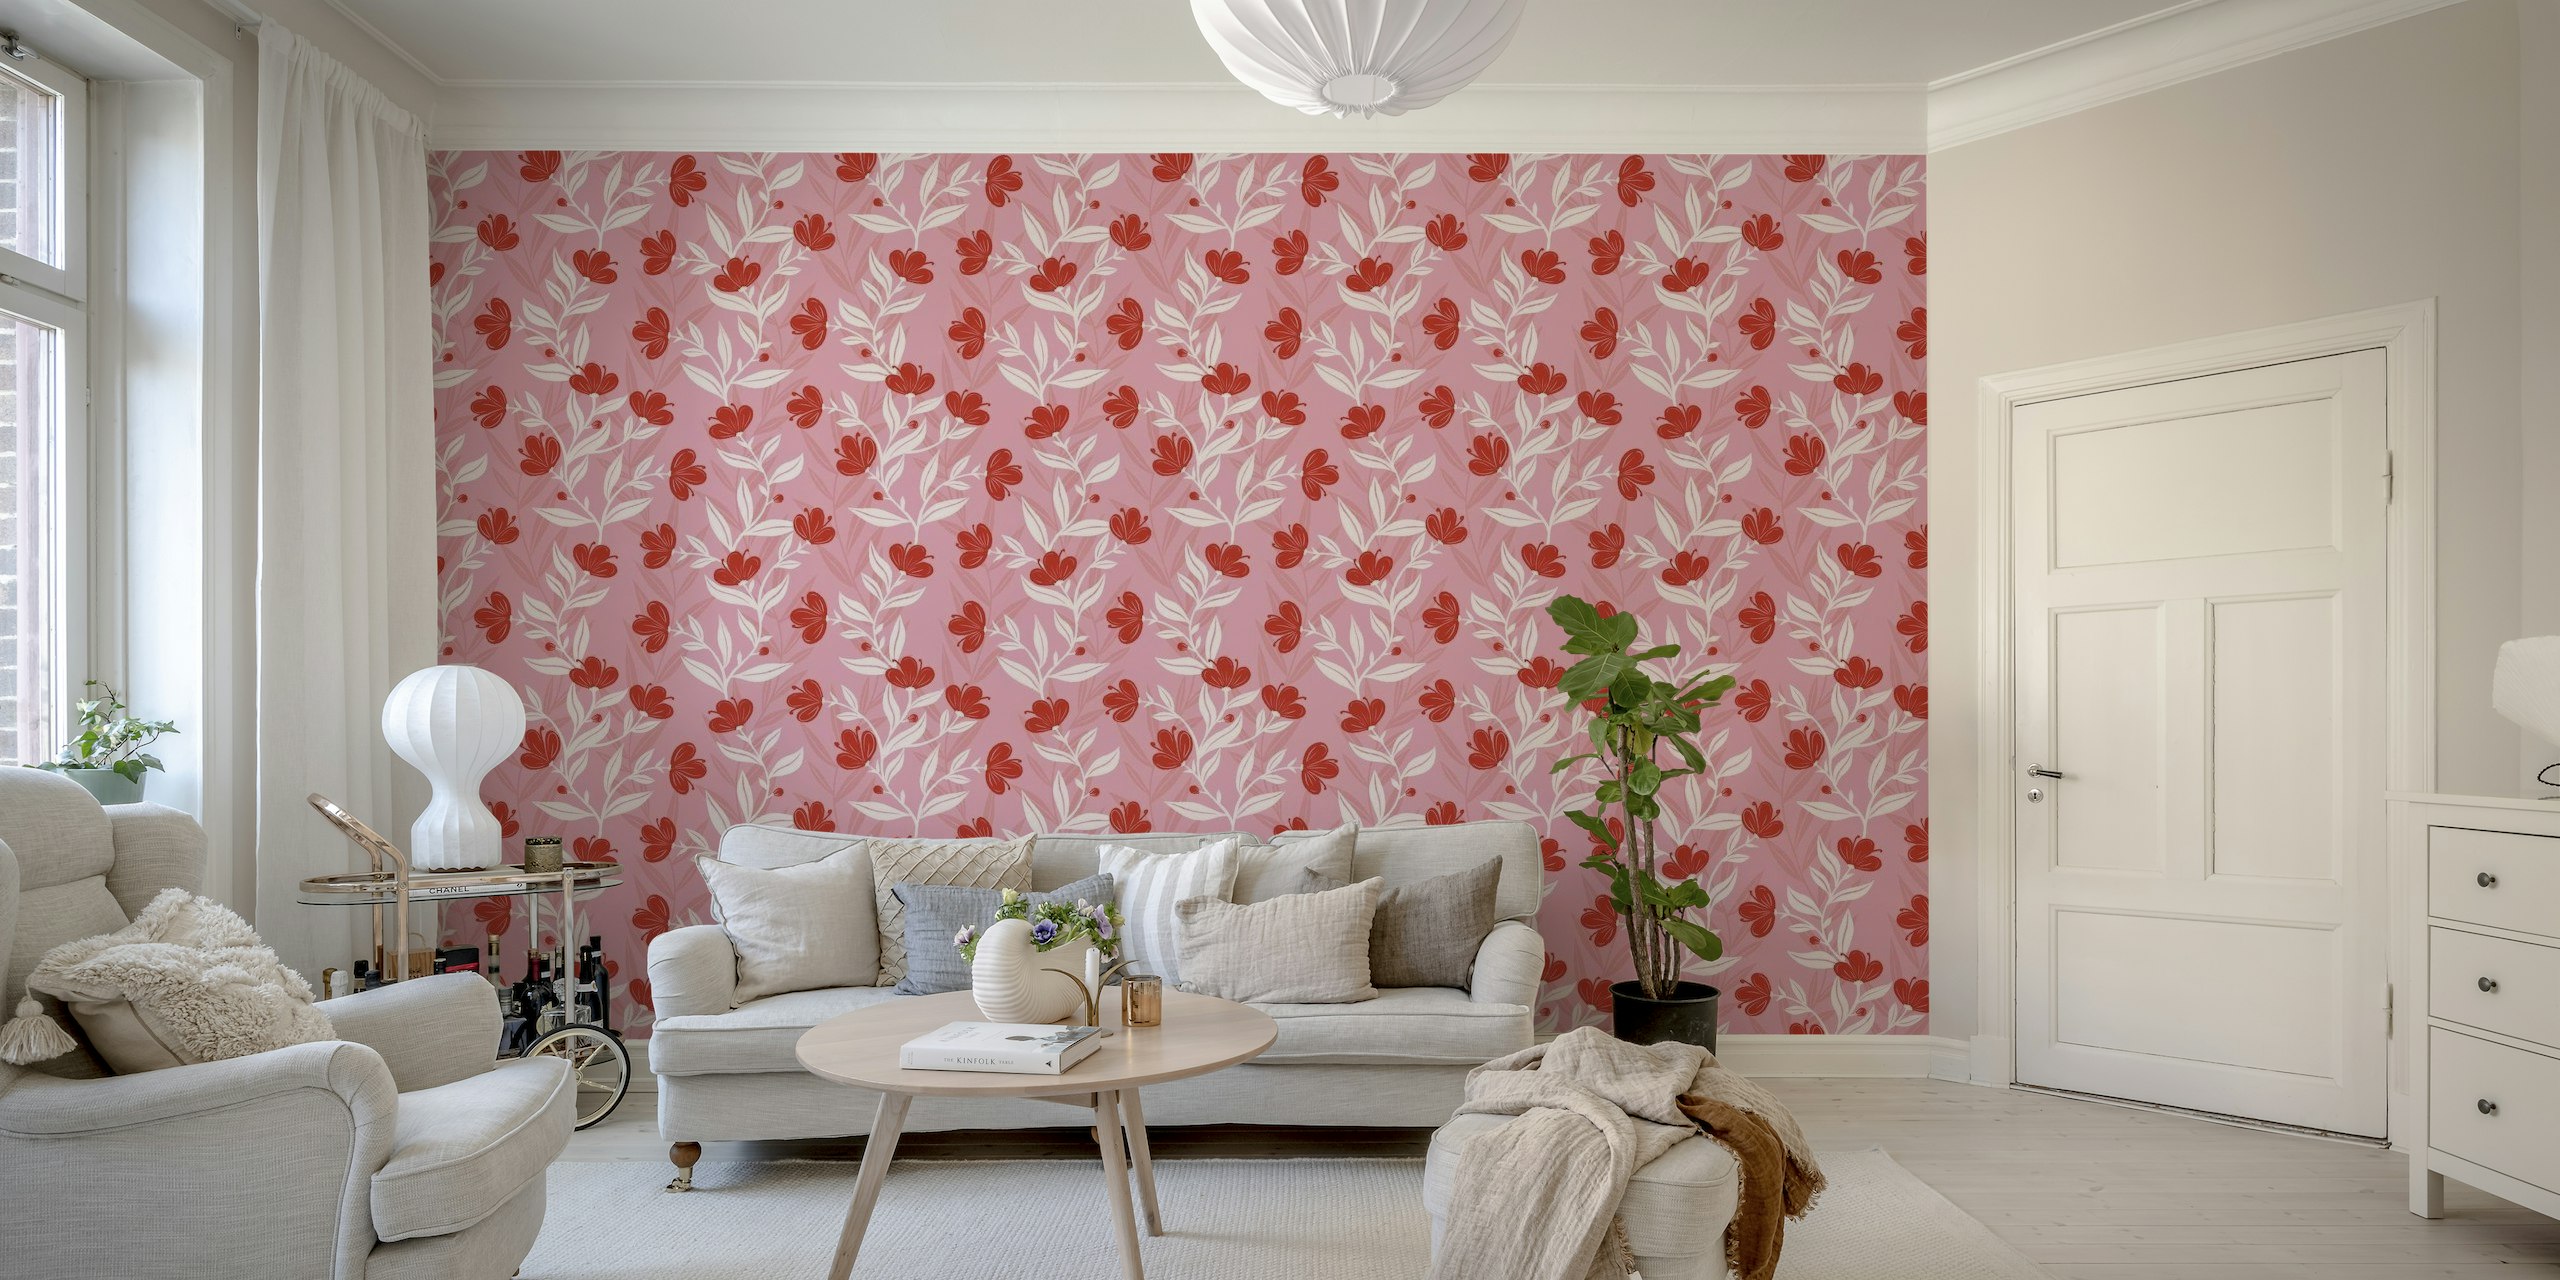 Bright red flowers and ivory leaves on a pink background wall mural